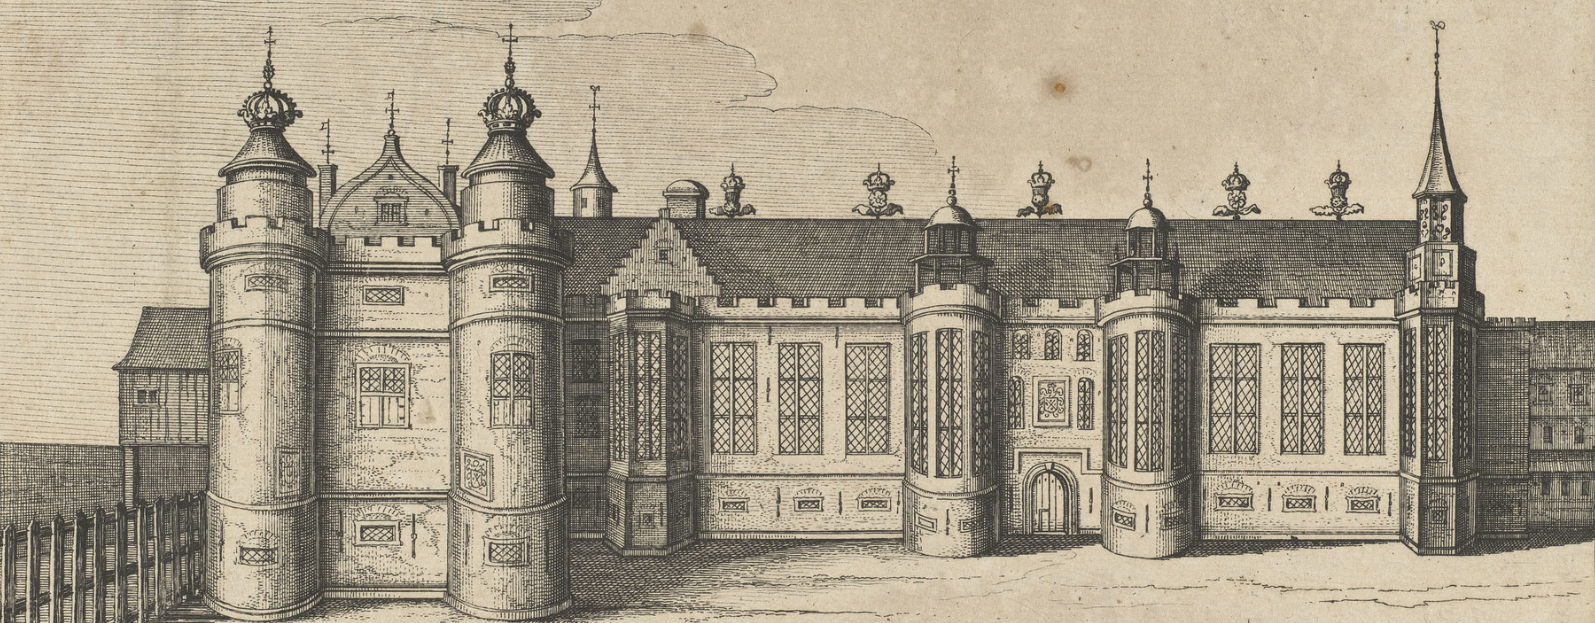 Engraving of James V's palace